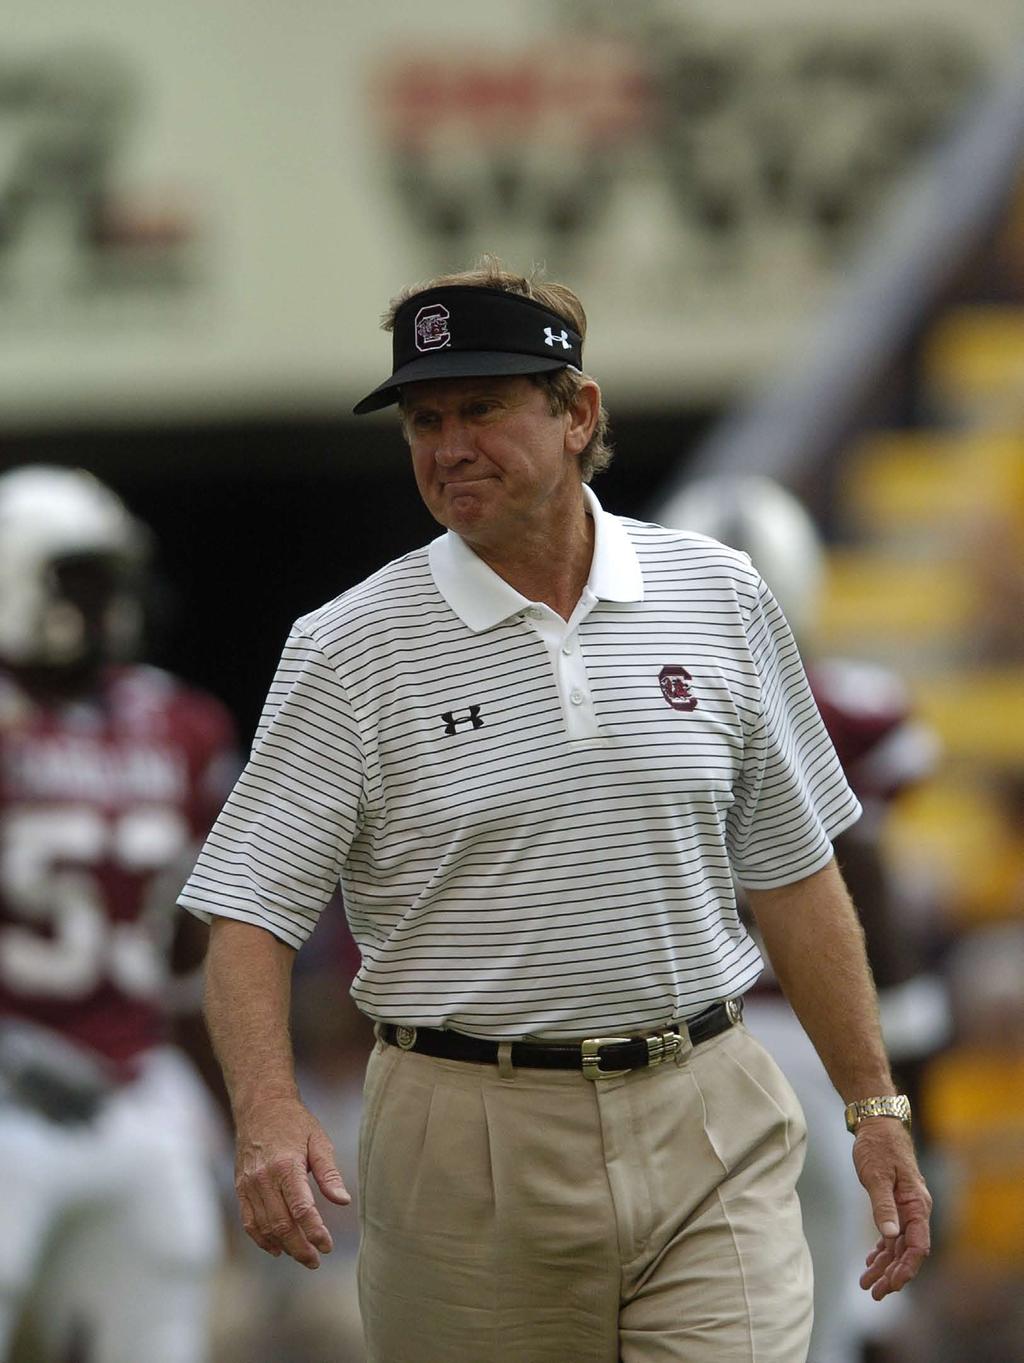 From Steve Spurrier: Carolina fans deserve the best, both on the field and in the stadium.